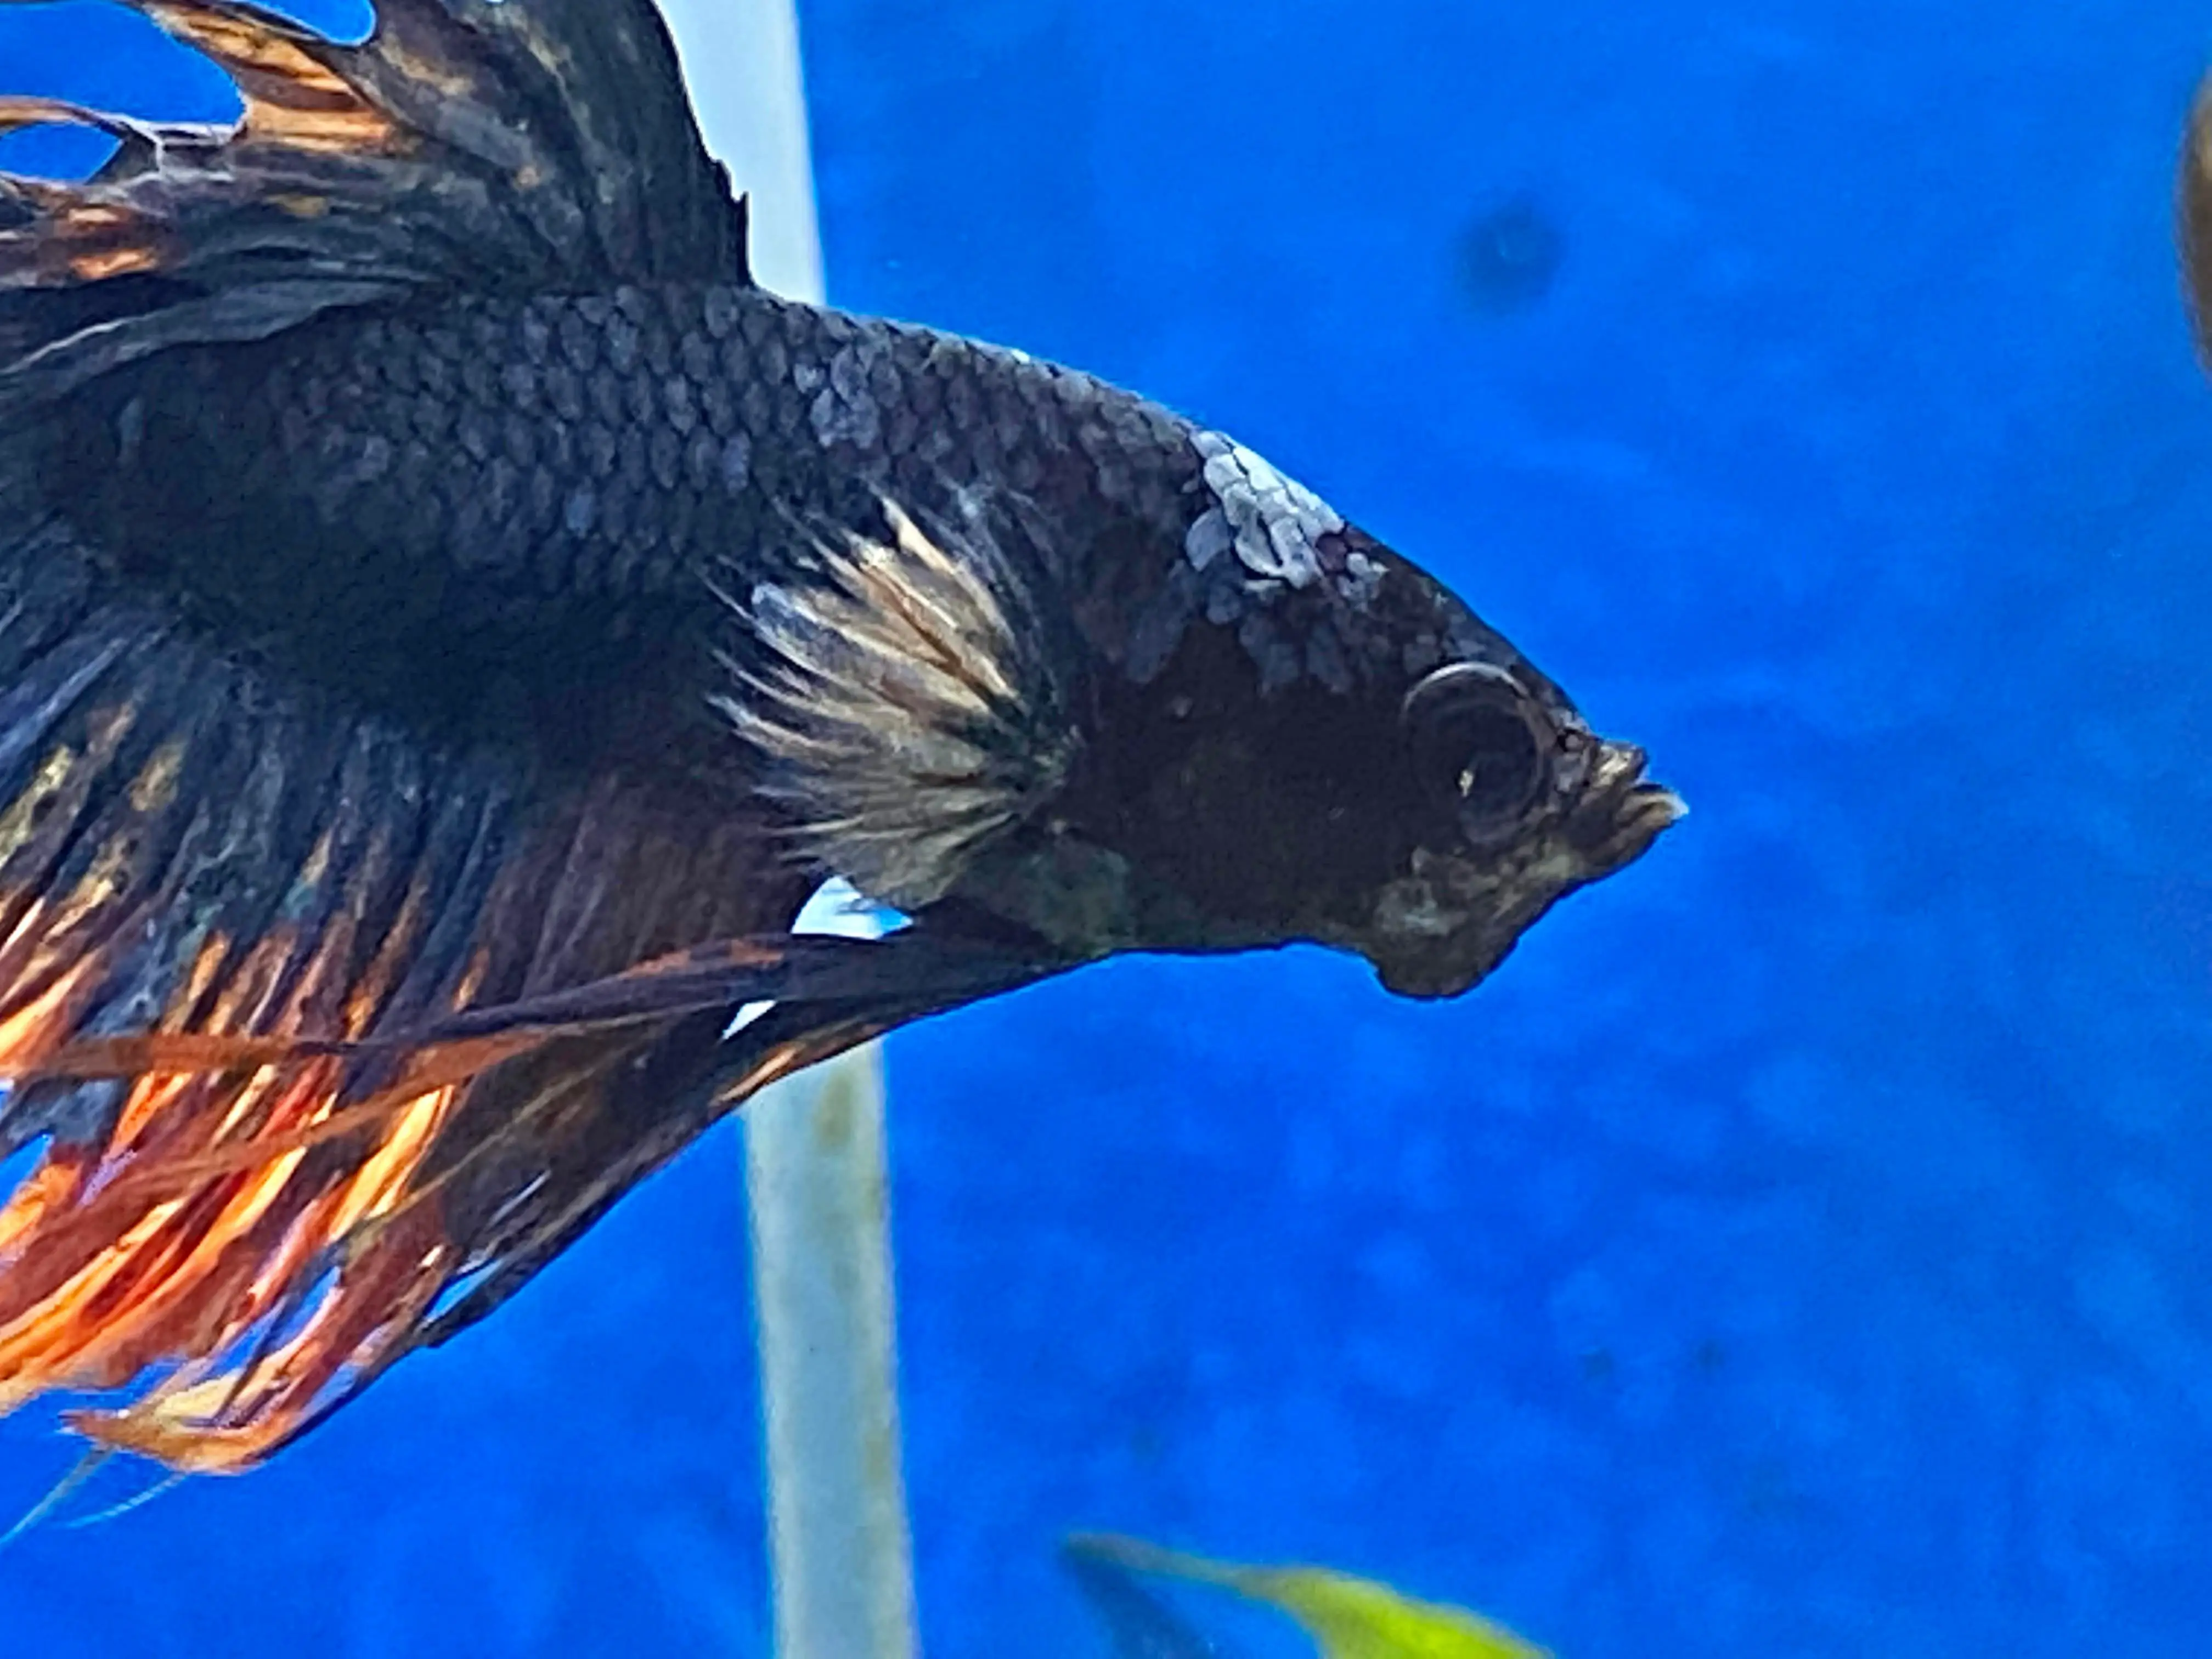 Betta Fish Health: What to Do About Lumps Under the Chin?